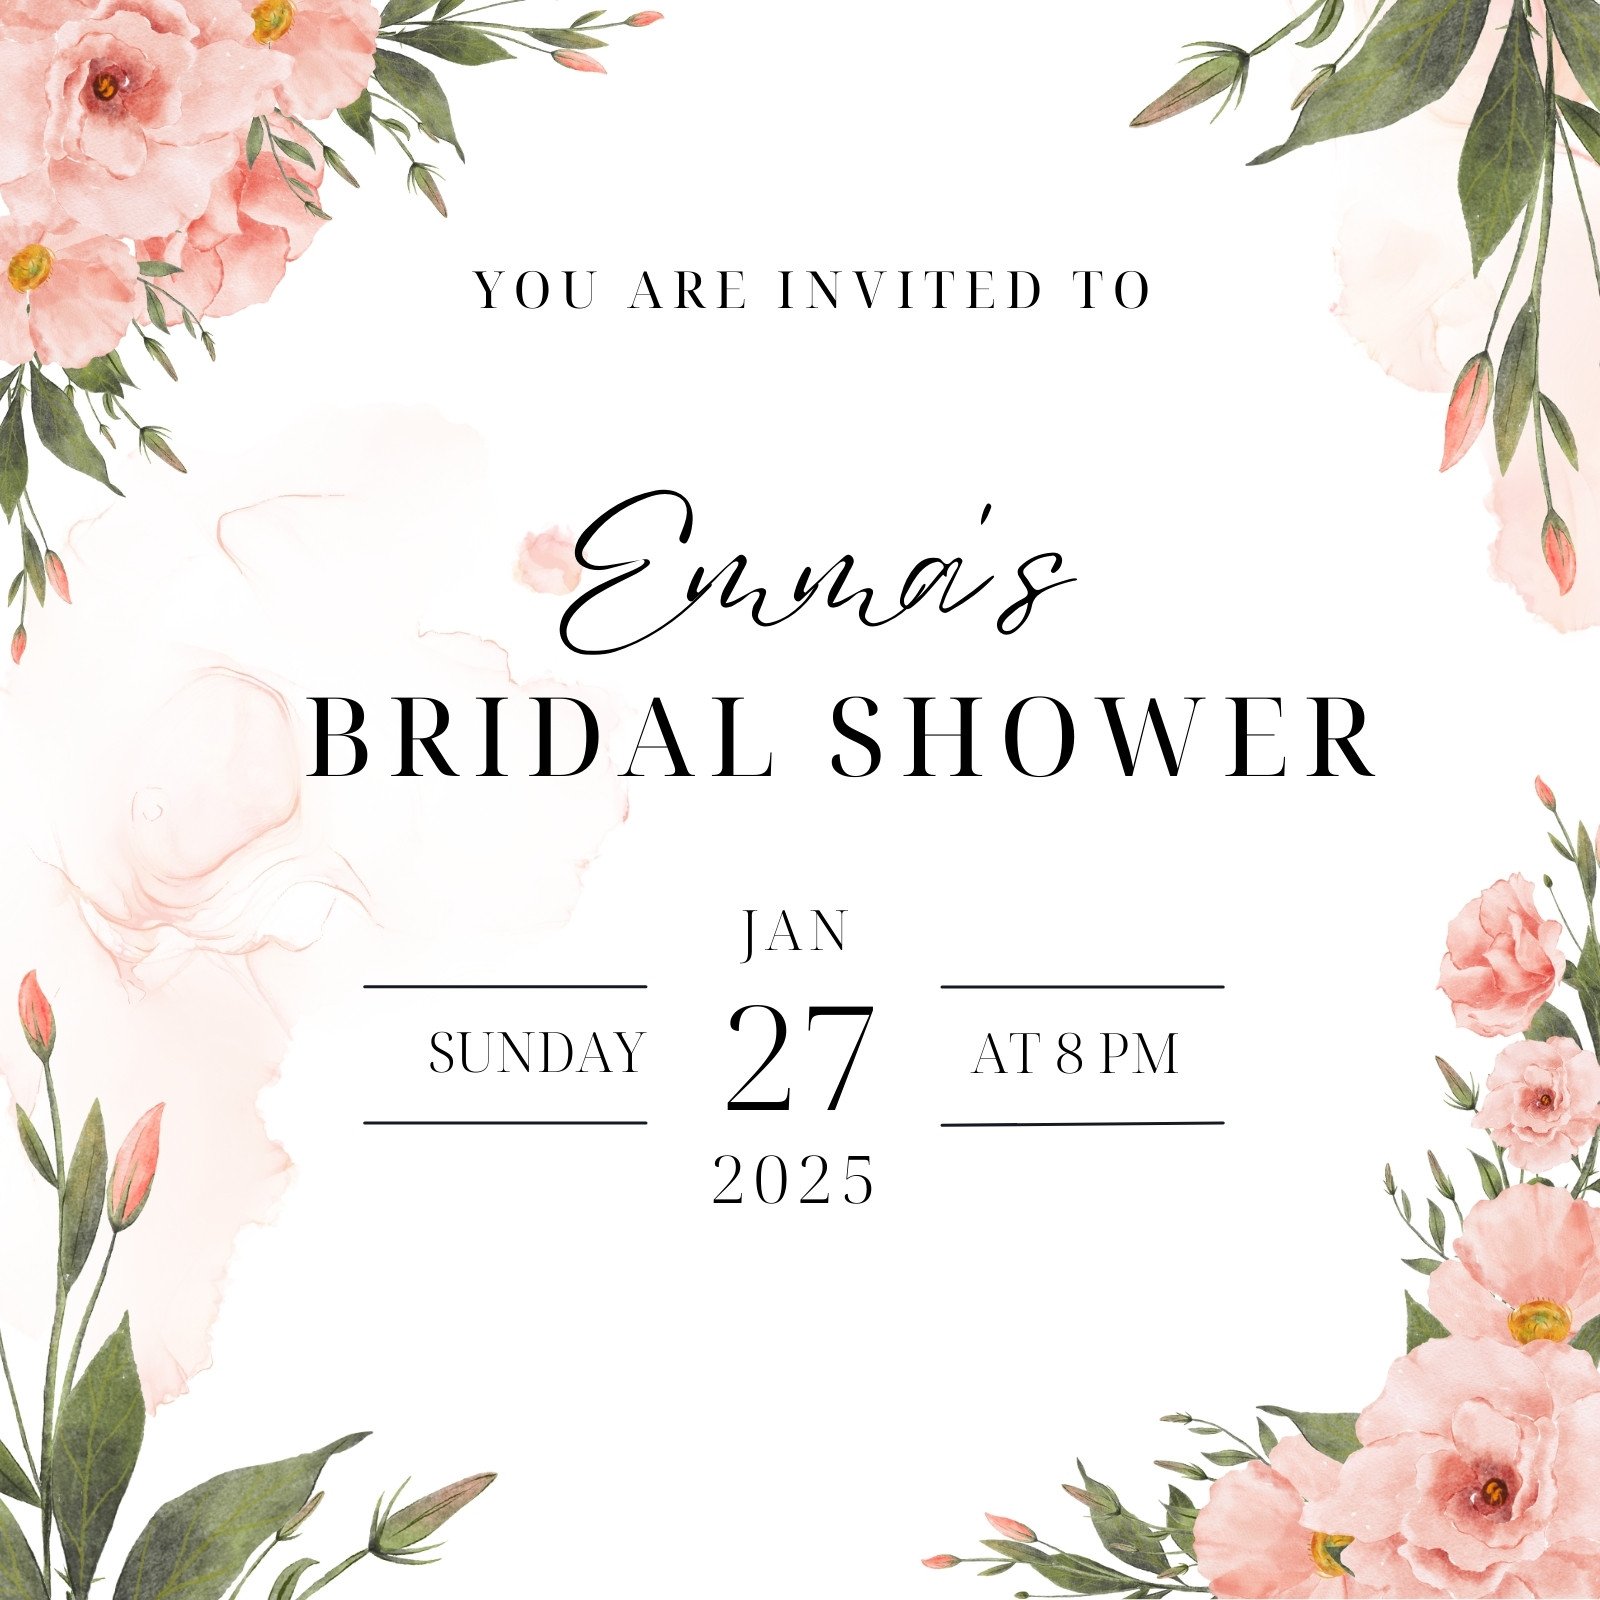 https://marketplace.canva.com/EAFnMZ8xWCw/1/0/1600w/canva-pink-watercolor-floral-bridal-shower-invitation-5rr9rcPxYYU.jpg